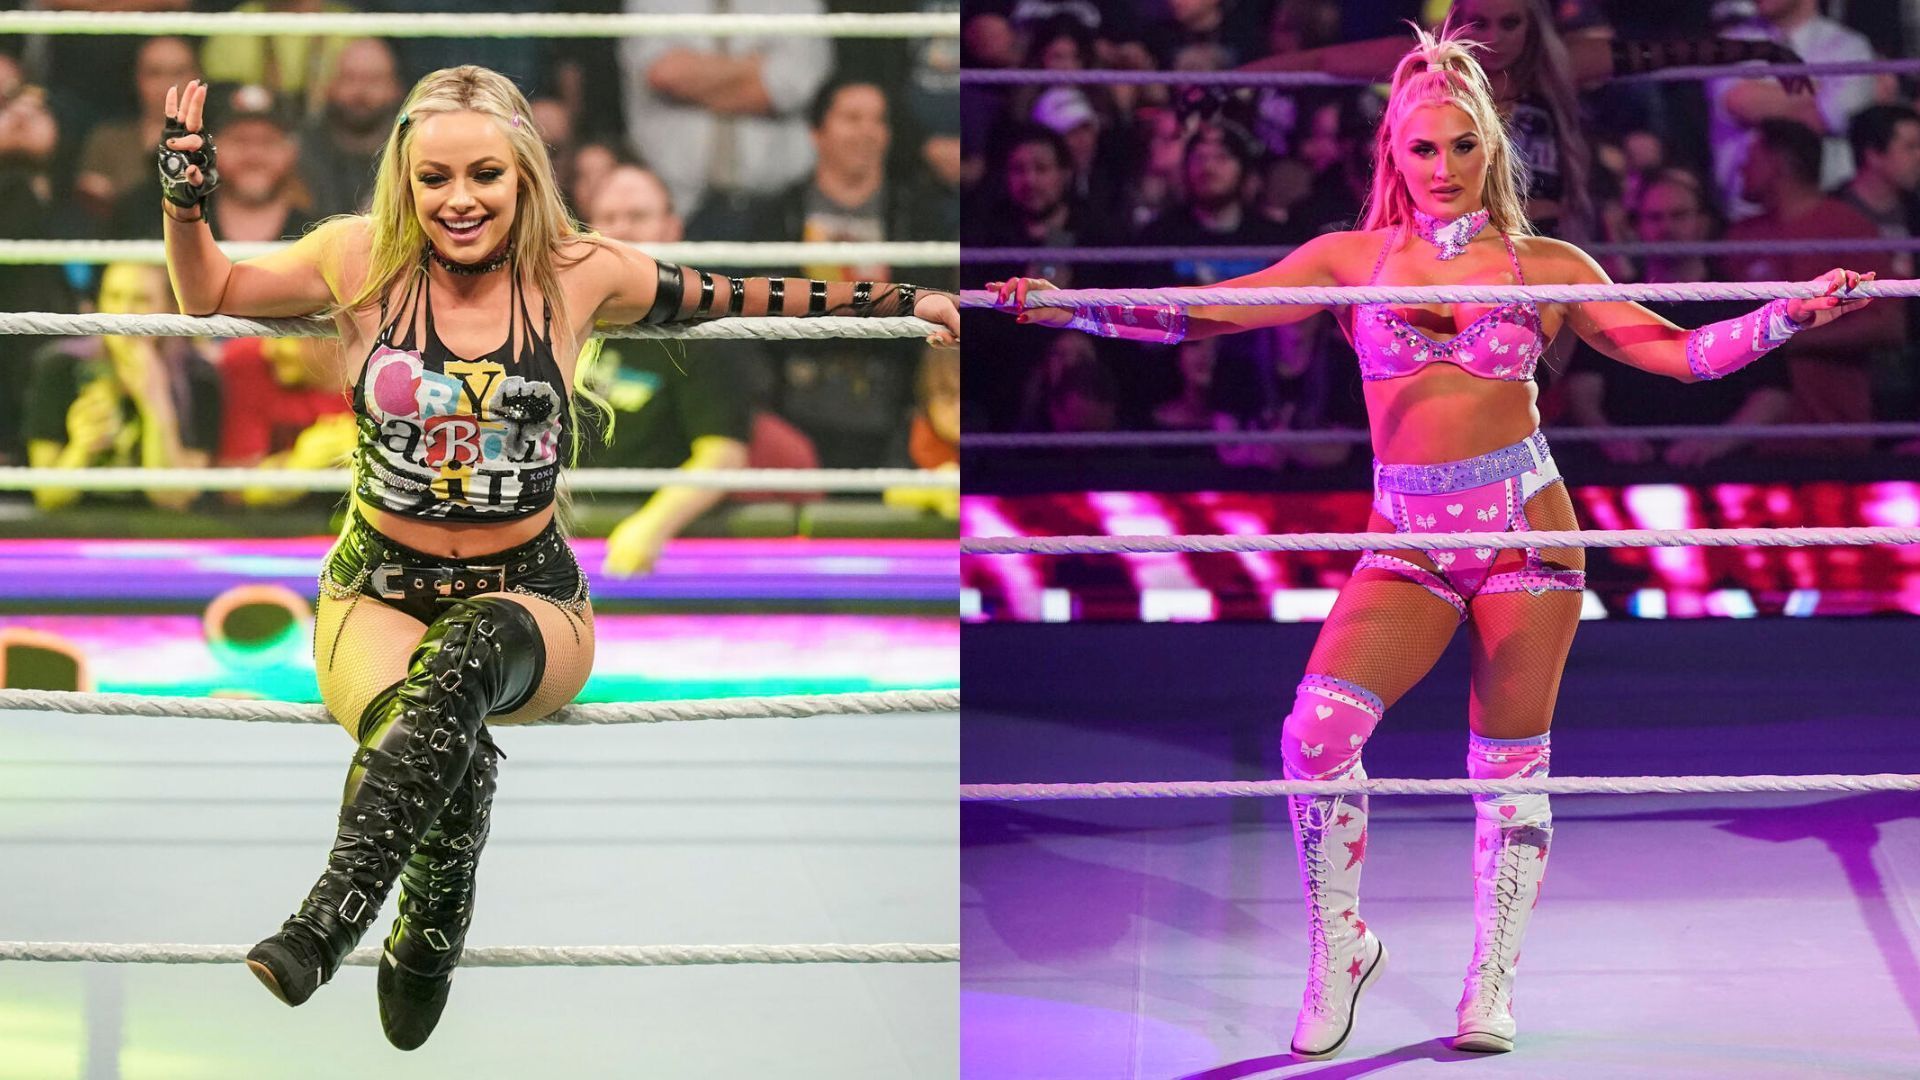 Liv Morgan and Tiffany Stratton faced off in a singles match on SmackDown